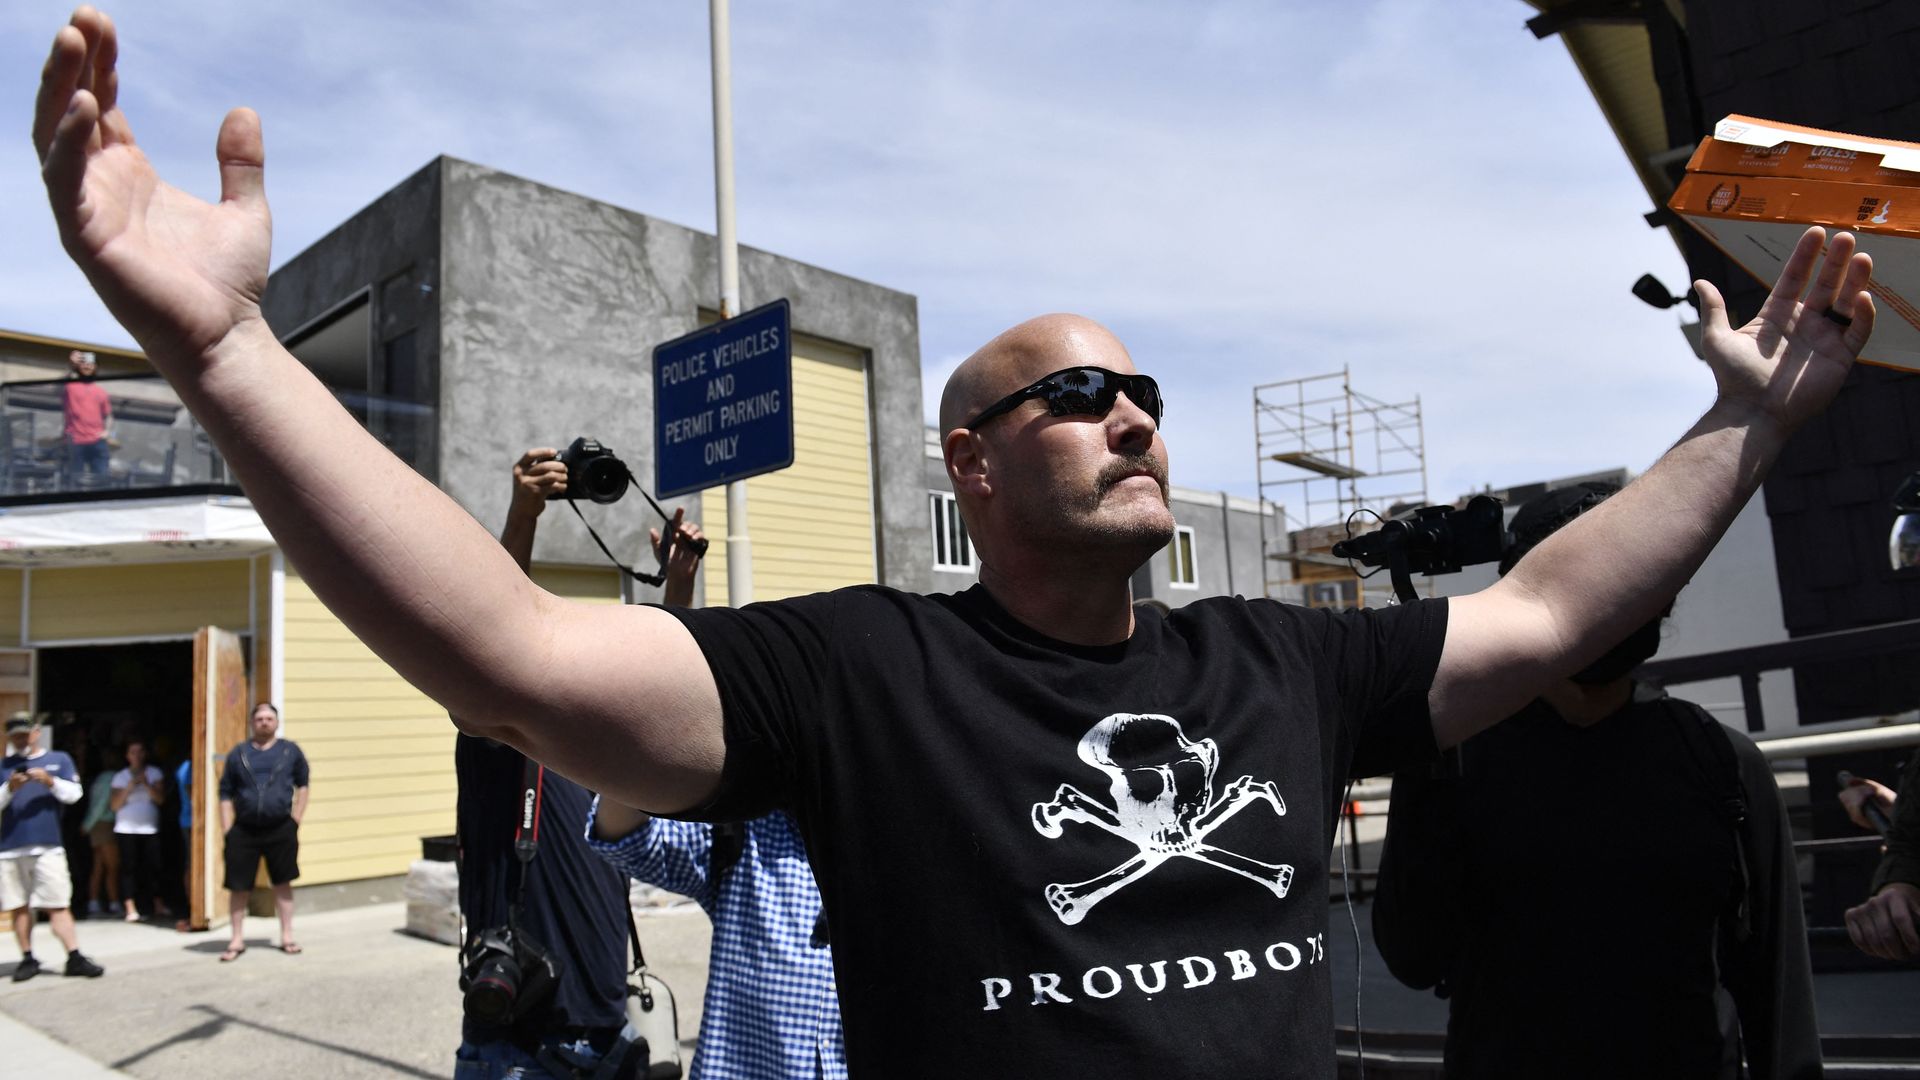 A person wears a Proud Boys t-shirt as demonstrators face off during a demonstration for a "White Lives Matter" march and rally on April 11, 2021 in Huntington Beach, California. 